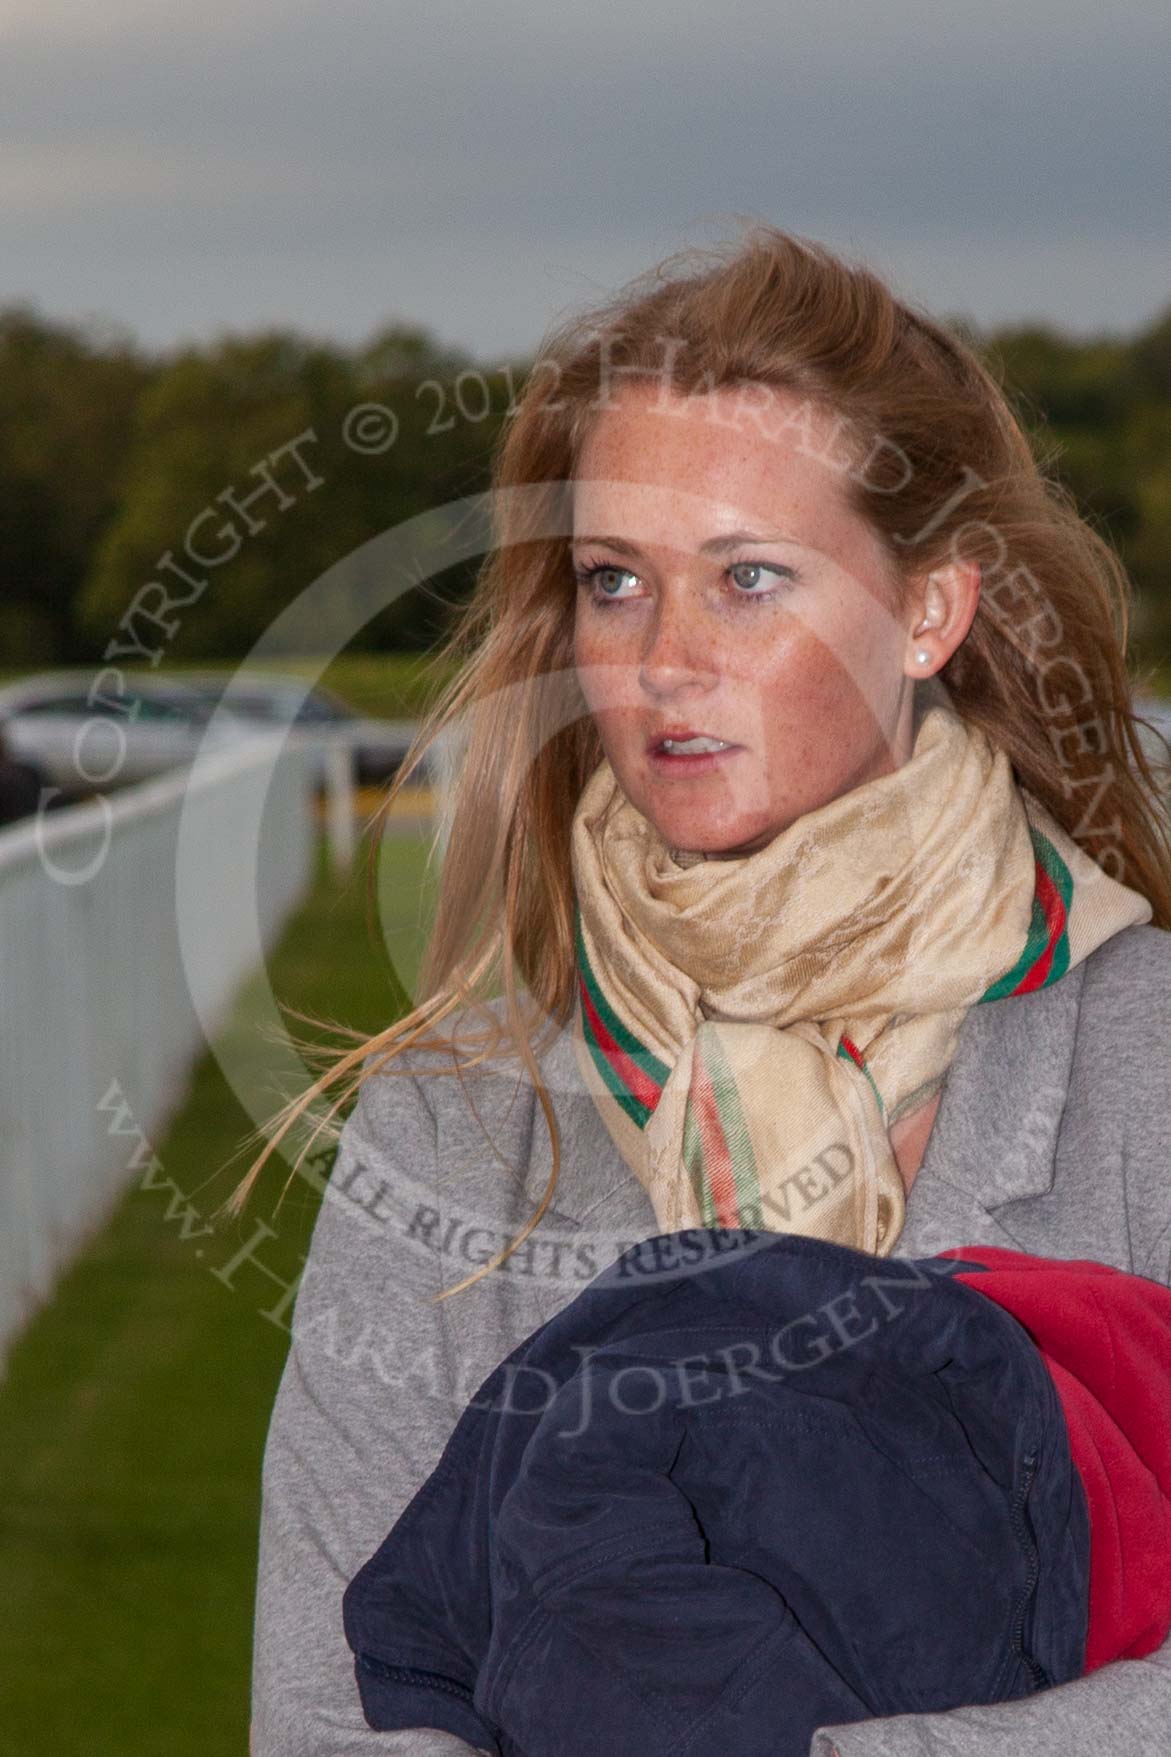 DBPC Polo in the Park 2012: Chloe Hunt, acting goal judge and daughter of Polo Manager and umpire Ian 'Ginger' Hunt..
Dallas Burston Polo Club,
Stoneythorpe Estate,
Southam,
Warwickshire,
United Kingdom,
on 16 September 2012 at 17:48, image #299